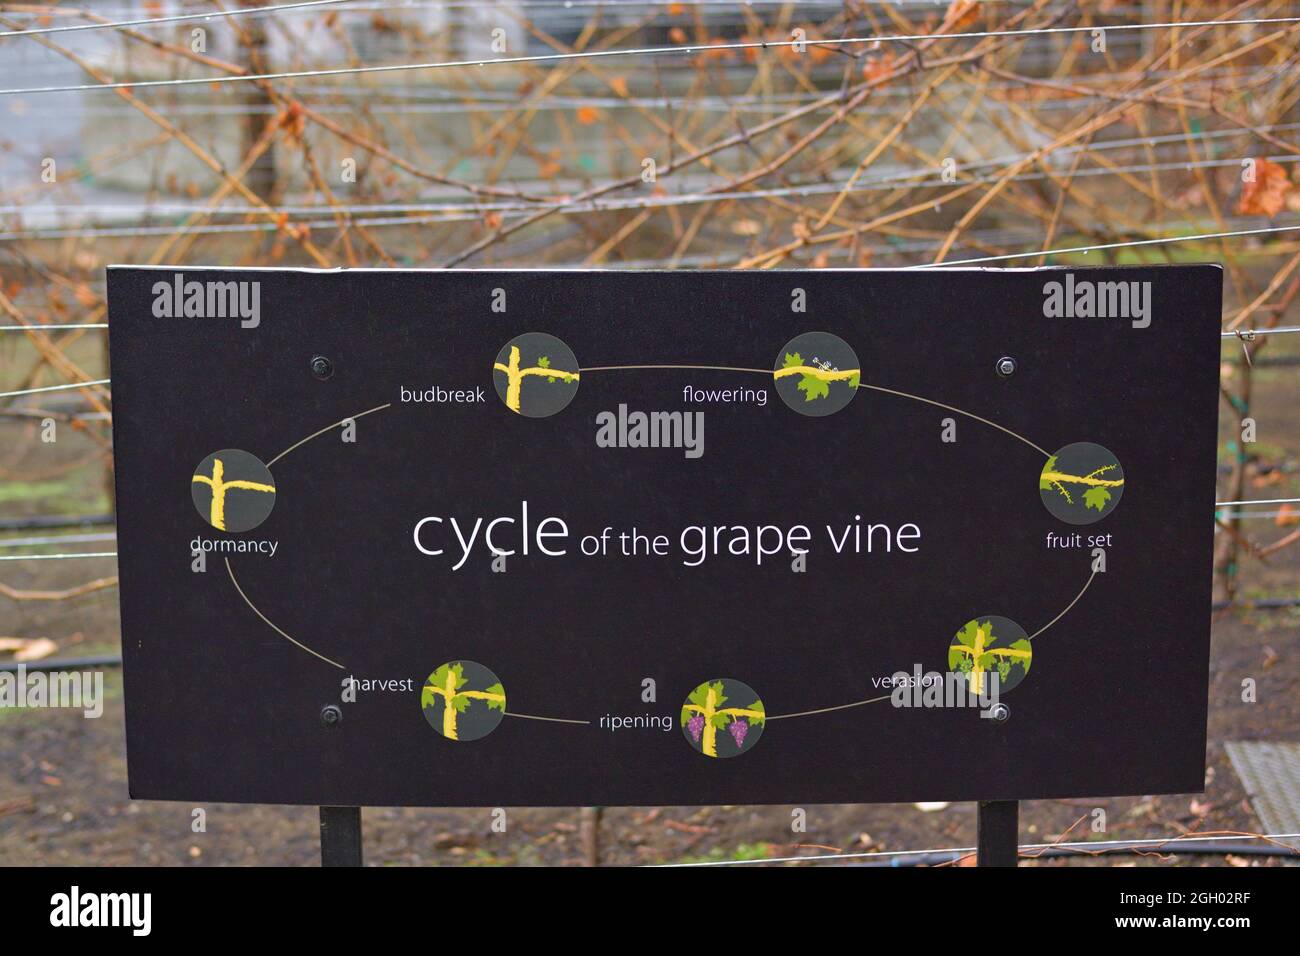 The cycle of the grape vine - Domaine Chandon winery by LVMH, Yountville CA Stock Photo